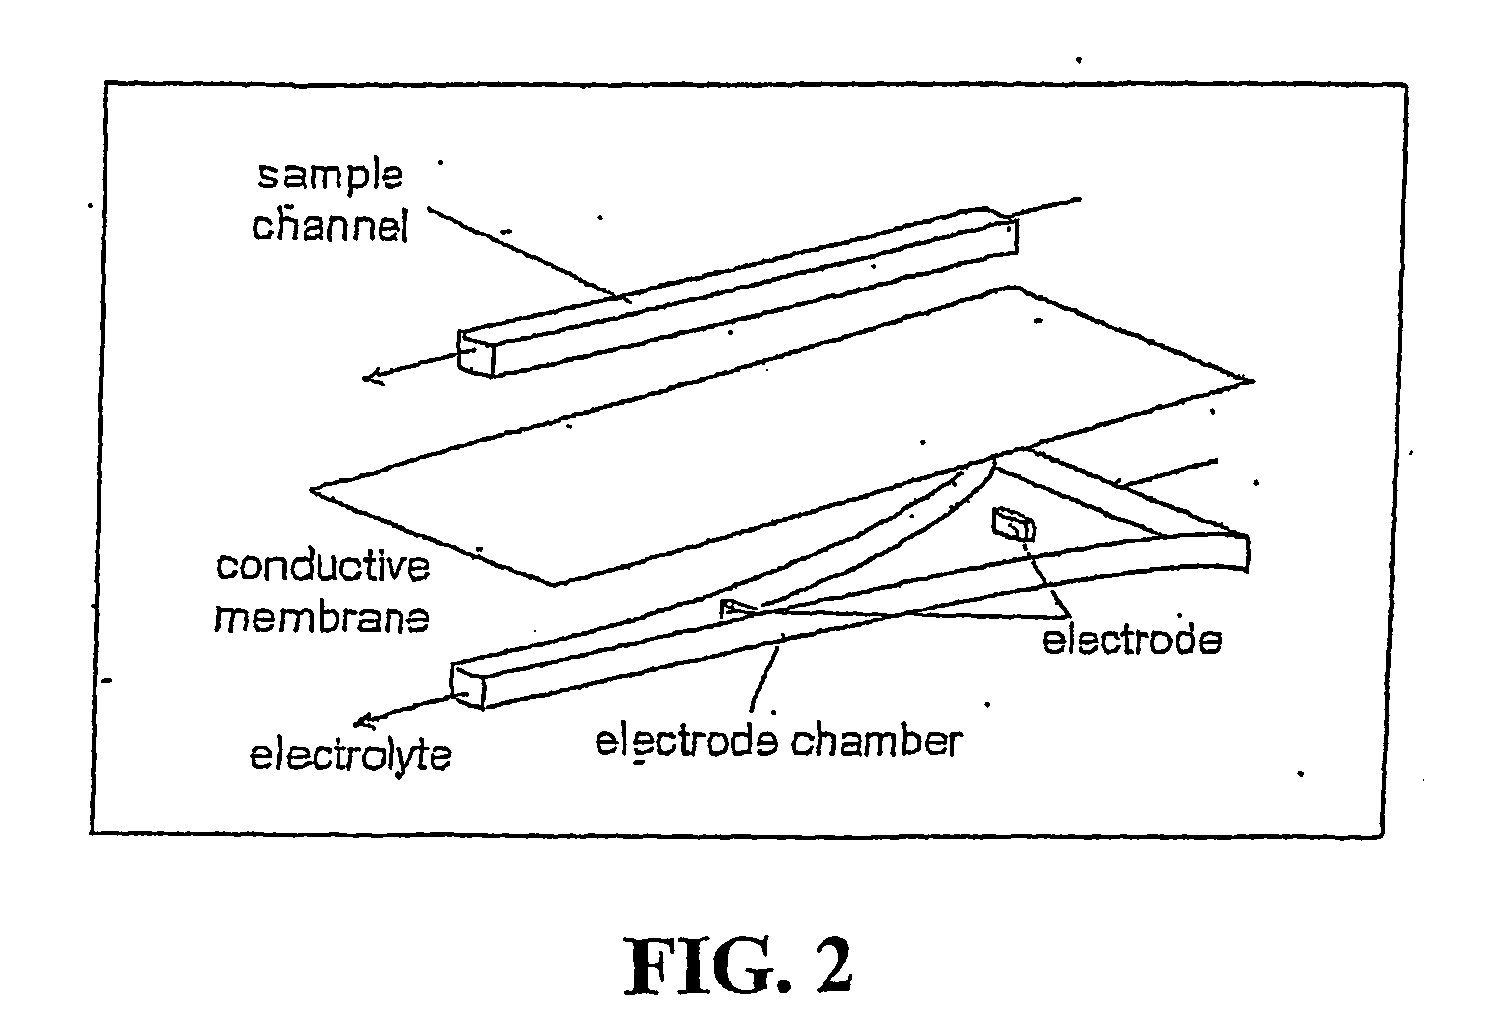 Devices and methods for focusing analytes in an electric field gradient II